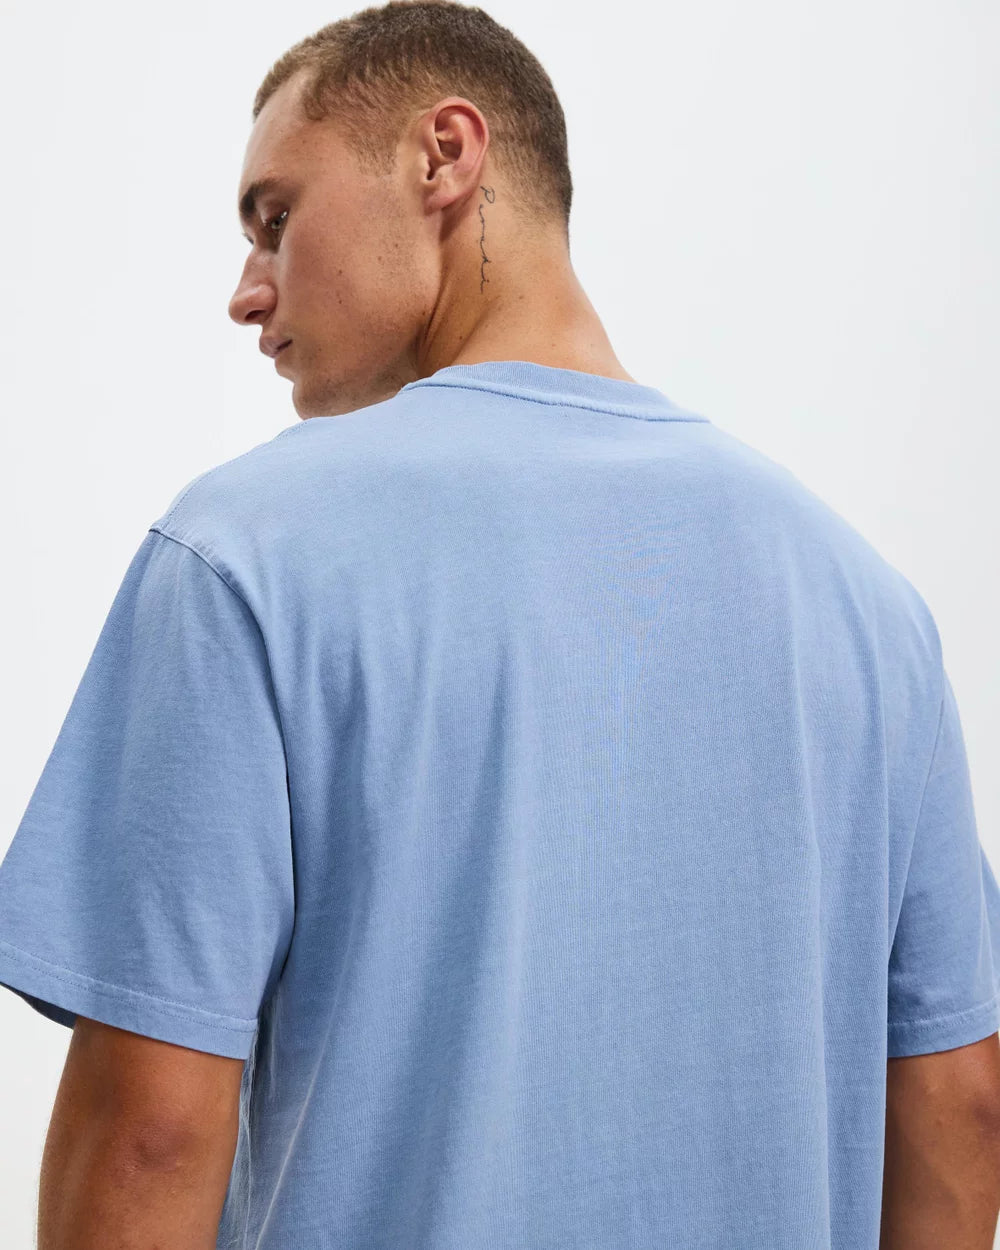 Assembly Label | Knox Oversized Organic Tee - Glacial